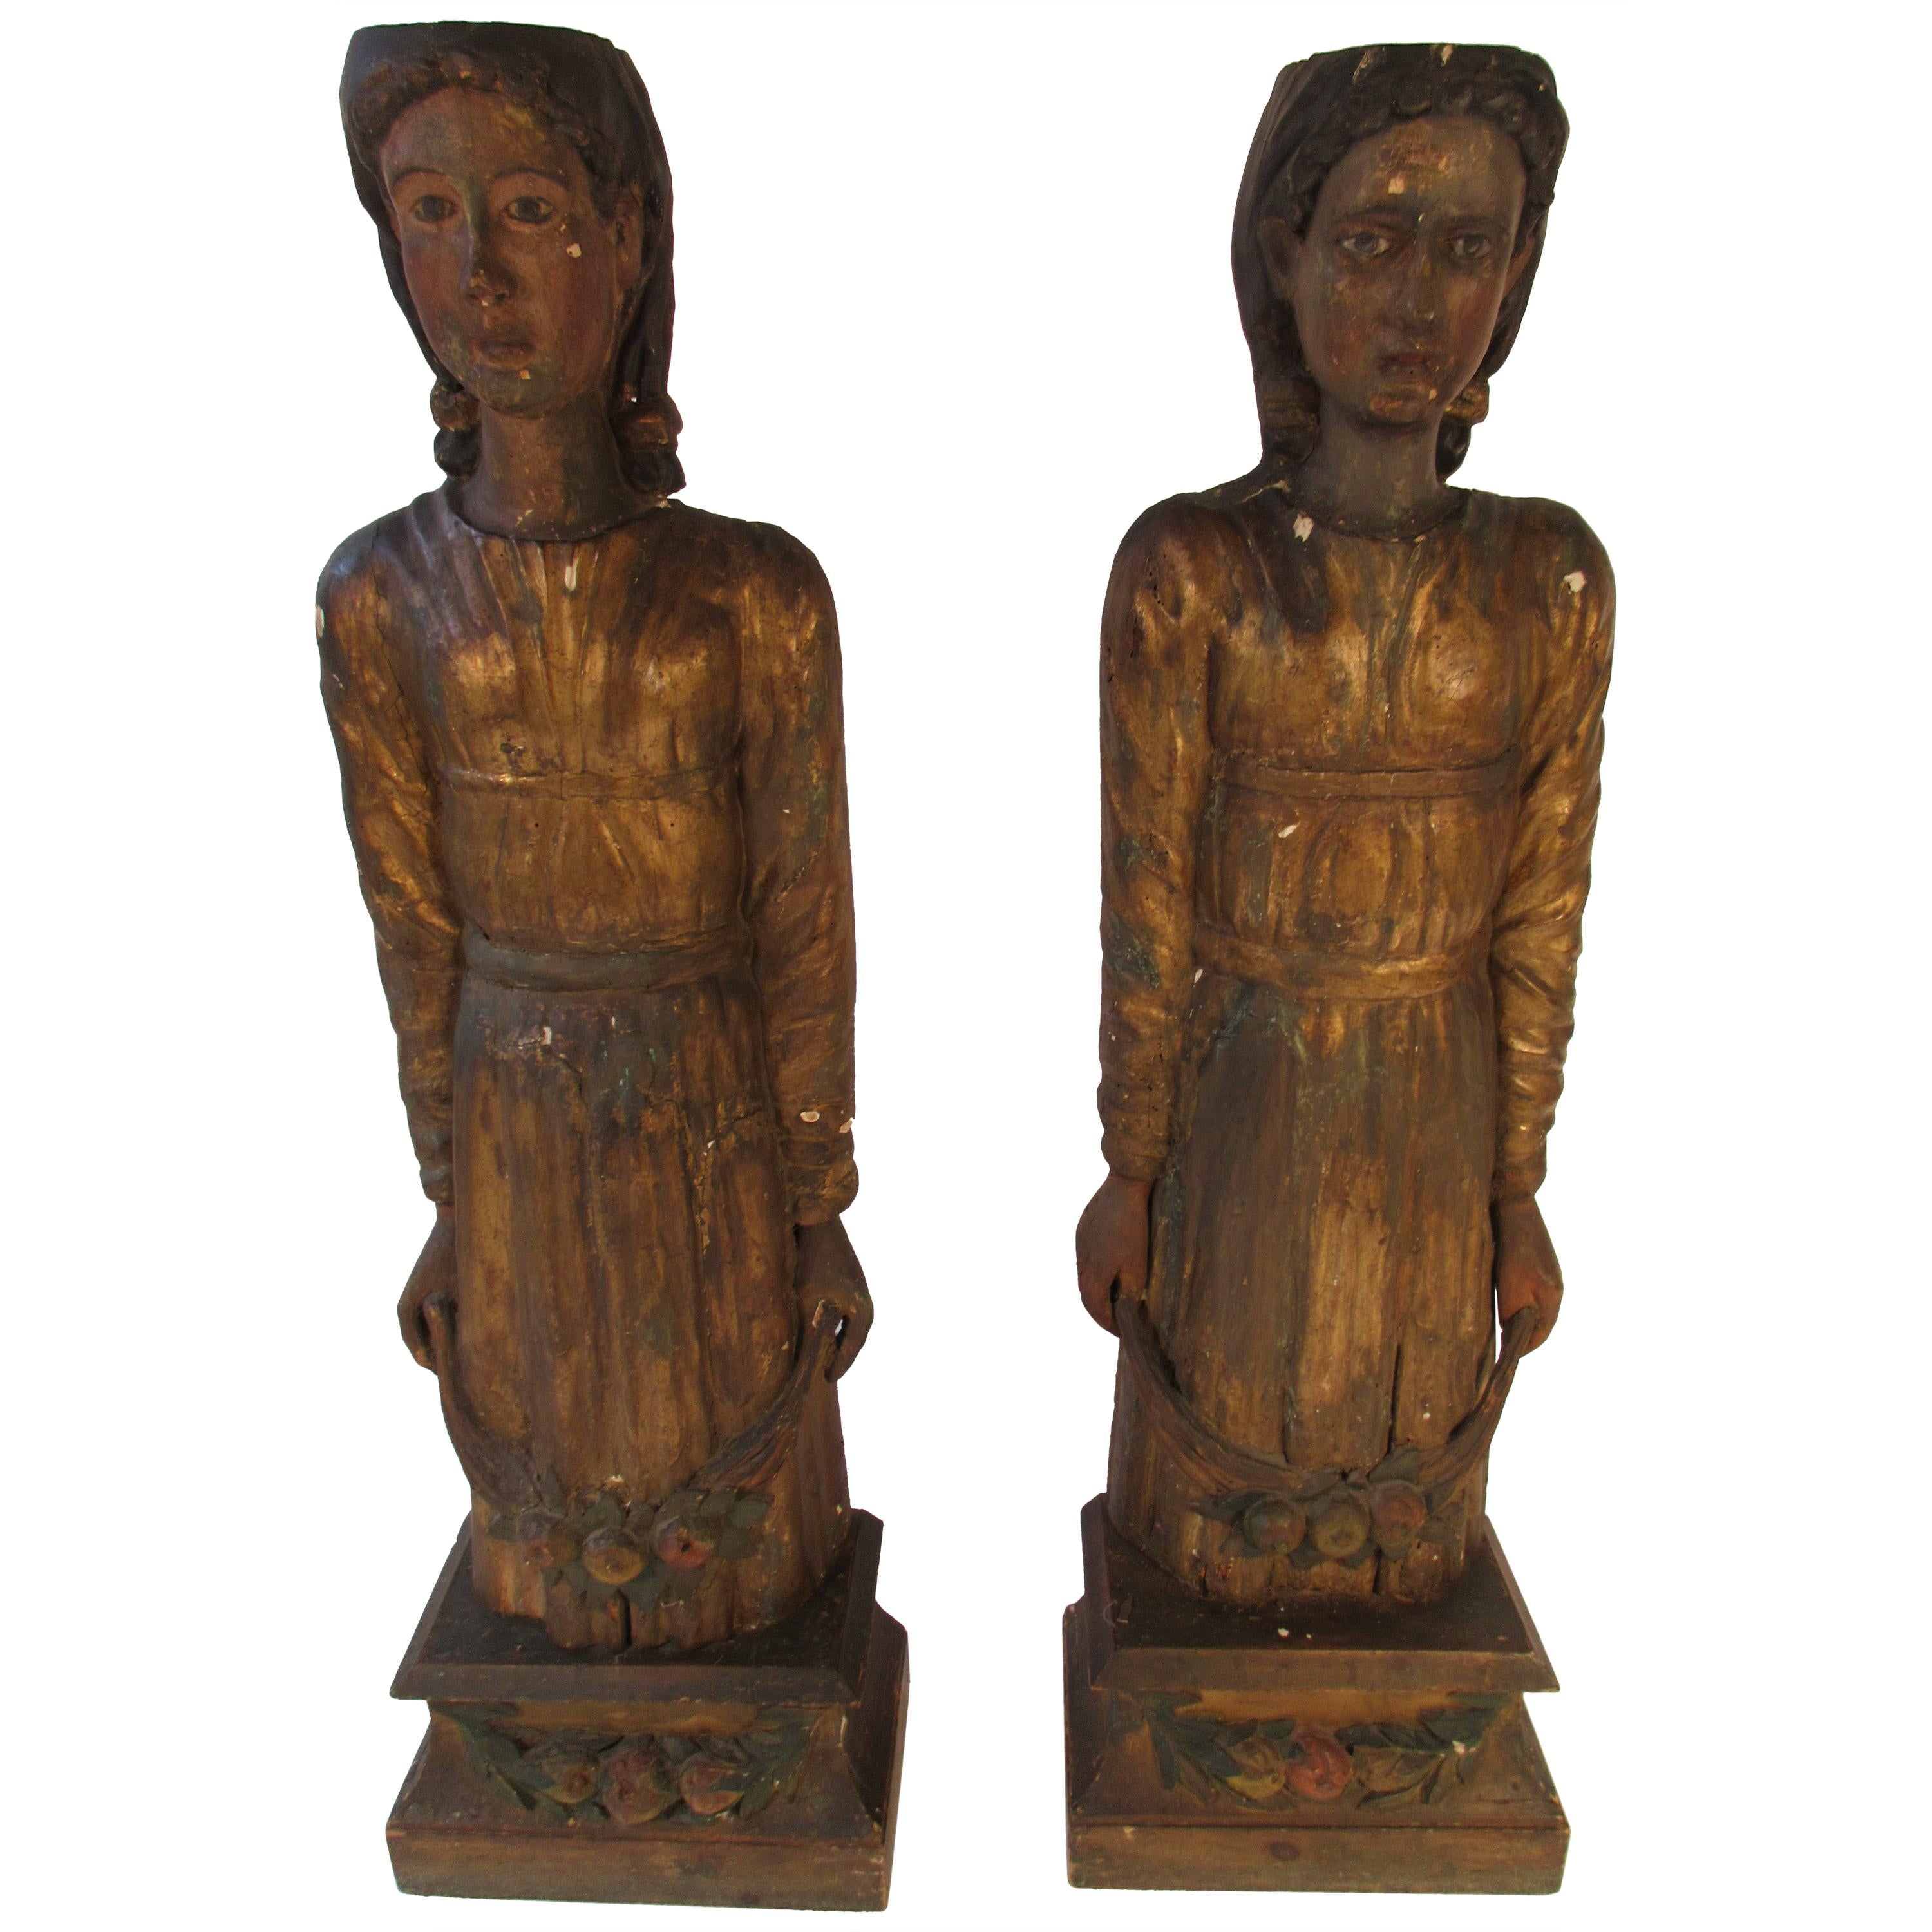 Pair of Large 1840s Venetian Wood Figures from an Italian Theatre